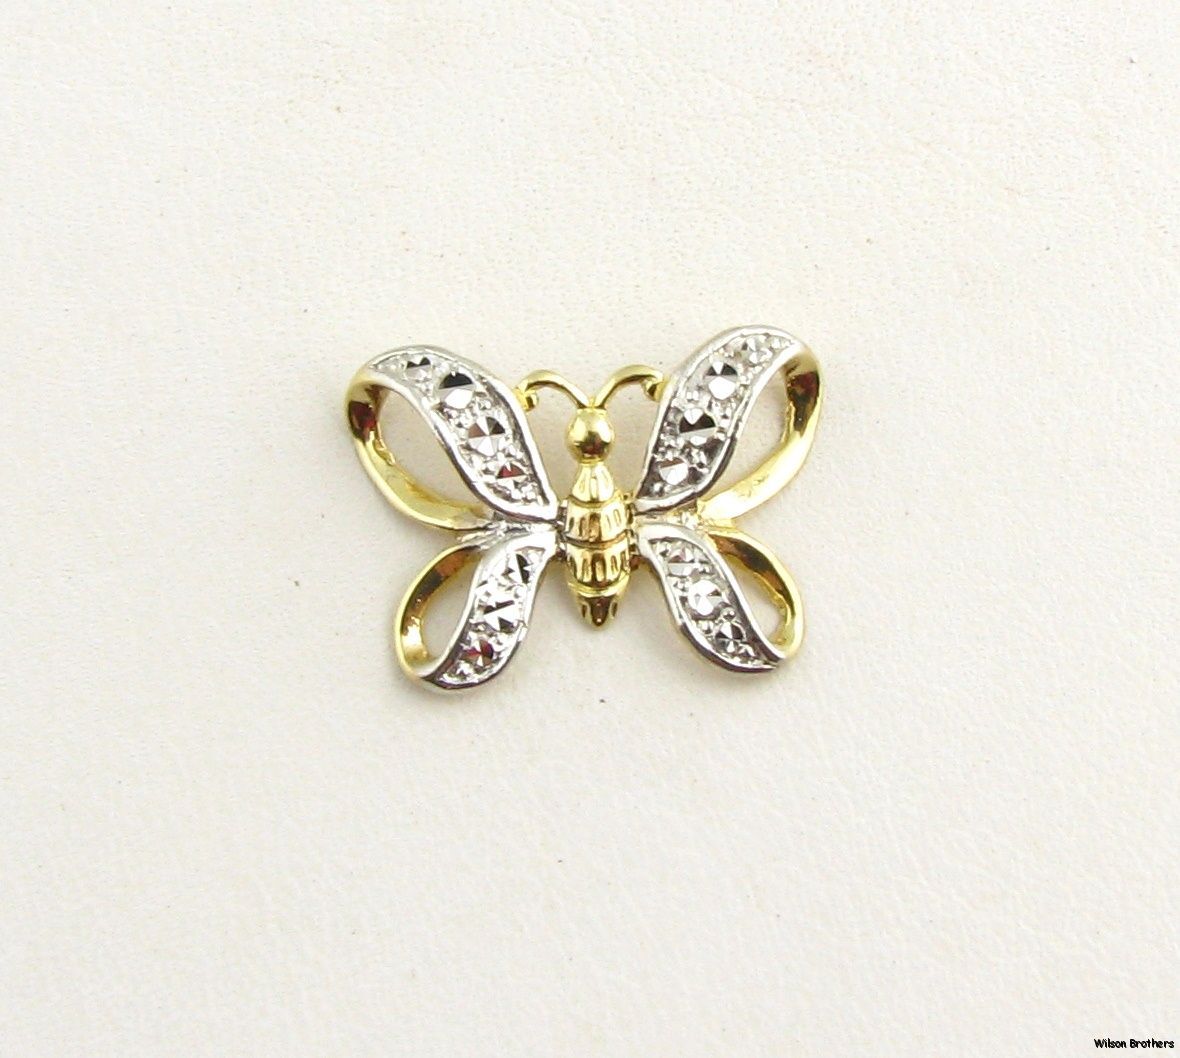 Butterfly Pendant Solid 10K Yellow White Gold Bead Accents 3D Fashion 